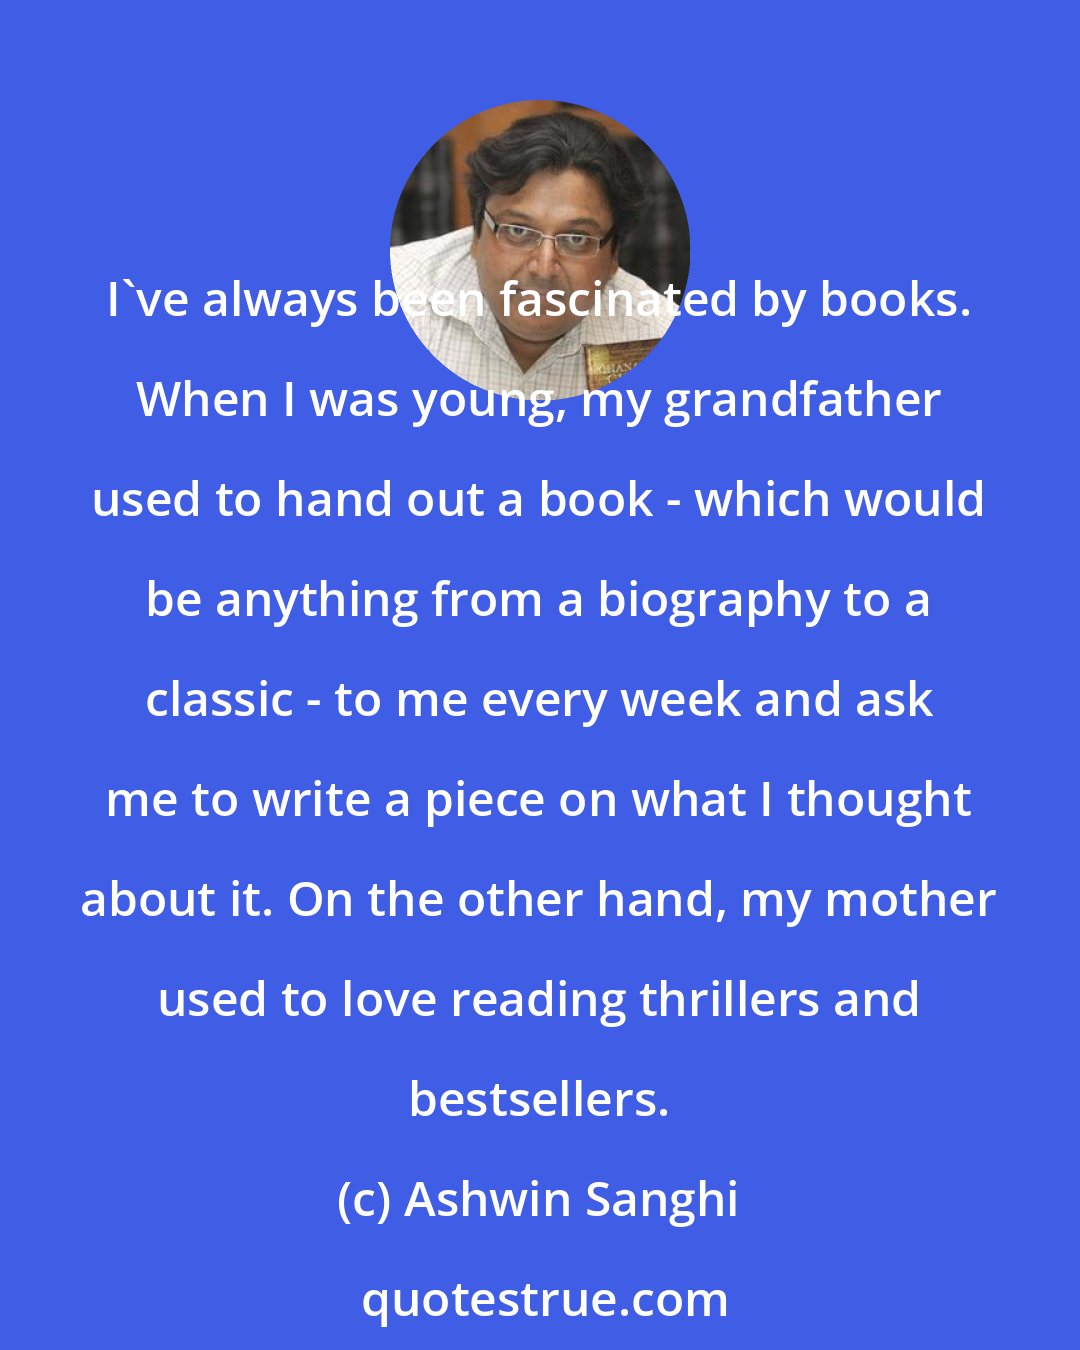 Ashwin Sanghi: I've always been fascinated by books. When I was young, my grandfather used to hand out a book - which would be anything from a biography to a classic - to me every week and ask me to write a piece on what I thought about it. On the other hand, my mother used to love reading thrillers and bestsellers.